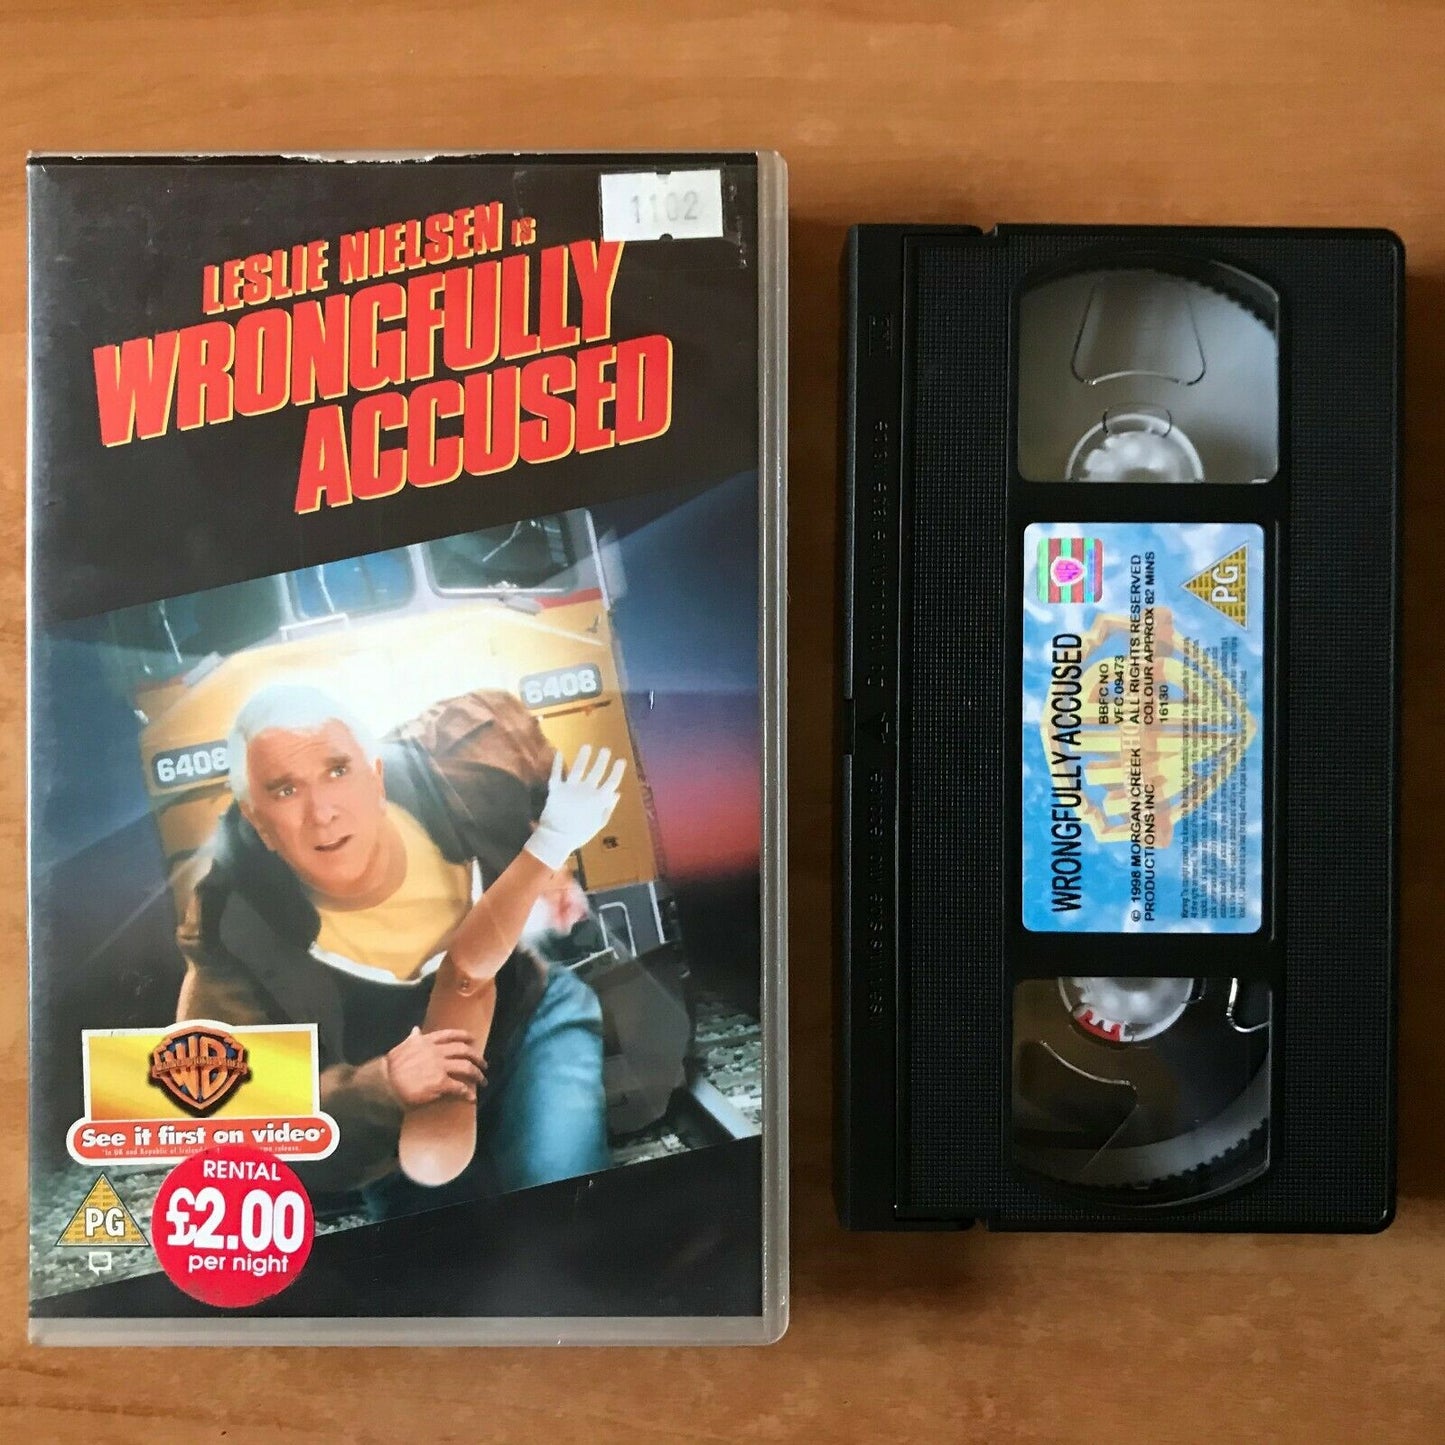 Wrongfully Accused: "The Fugitive" Parody - Comedy [Large Box] Rental - Pal VHS-